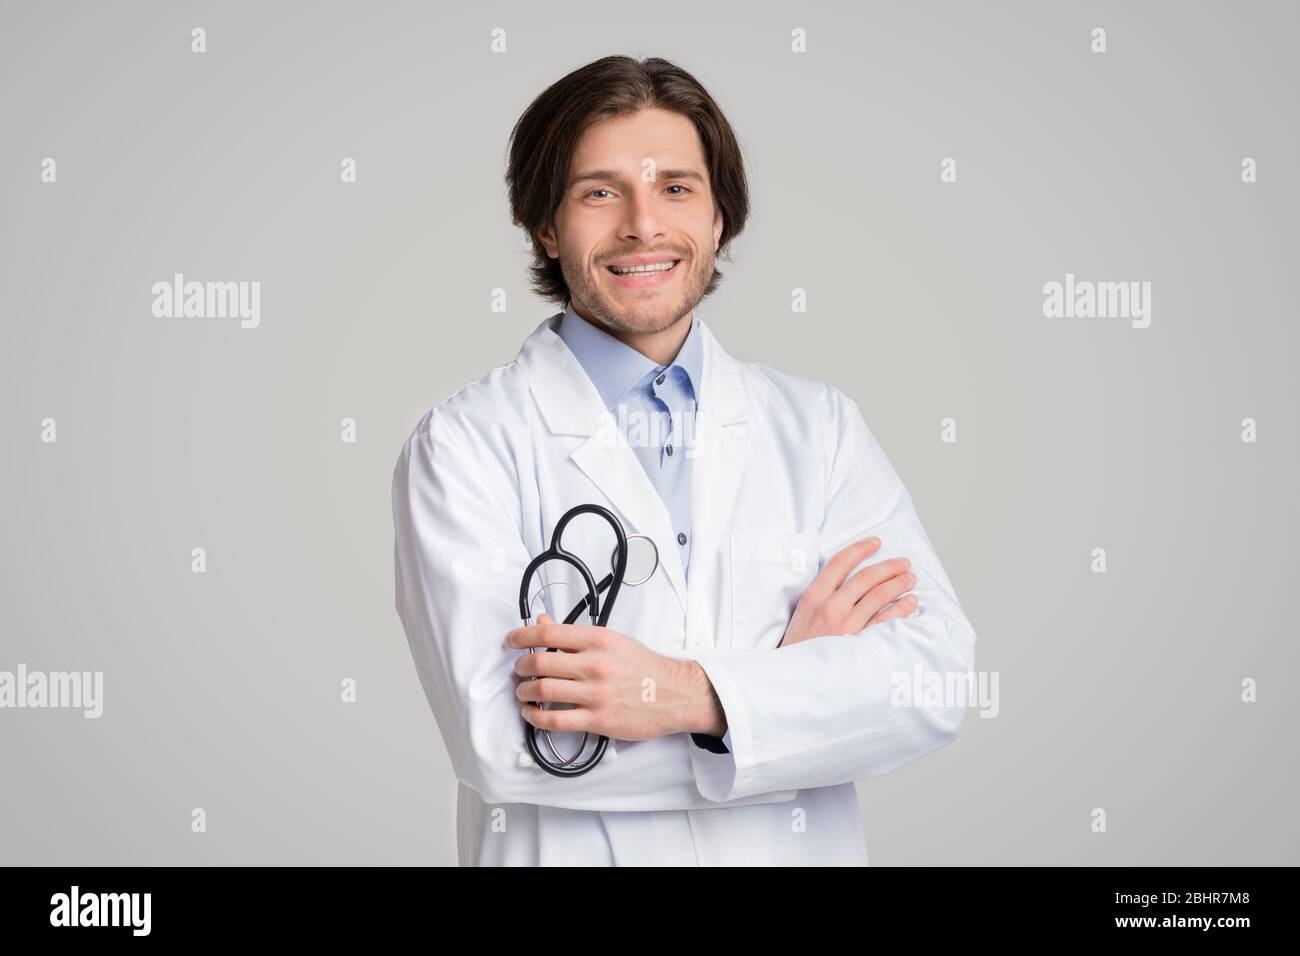 Reliable Medical Services. Confident Male Doctor Posing With Stethoscope In Hands Stock Photo